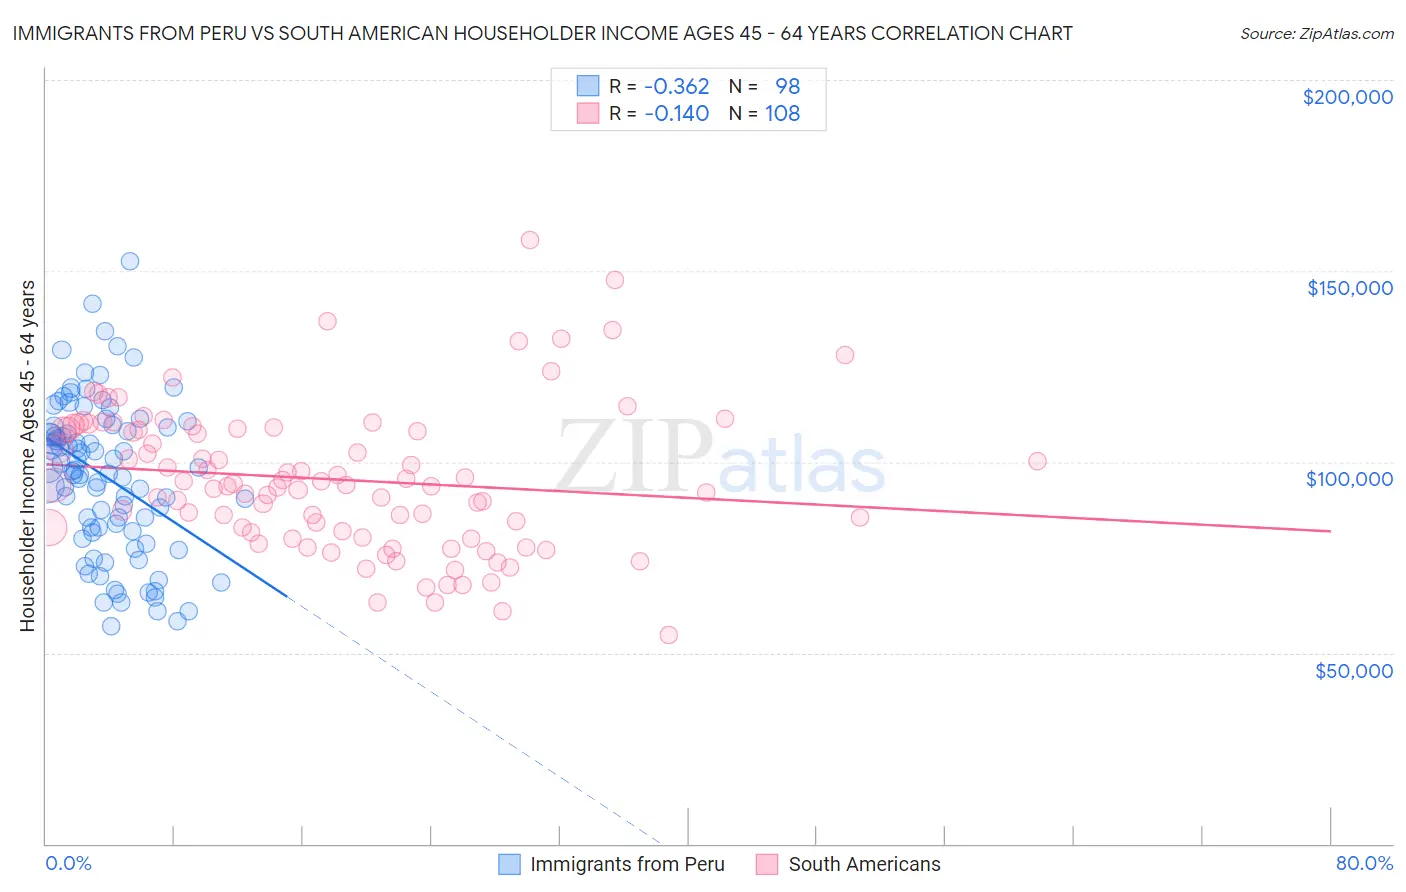 Immigrants from Peru vs South American Householder Income Ages 45 - 64 years